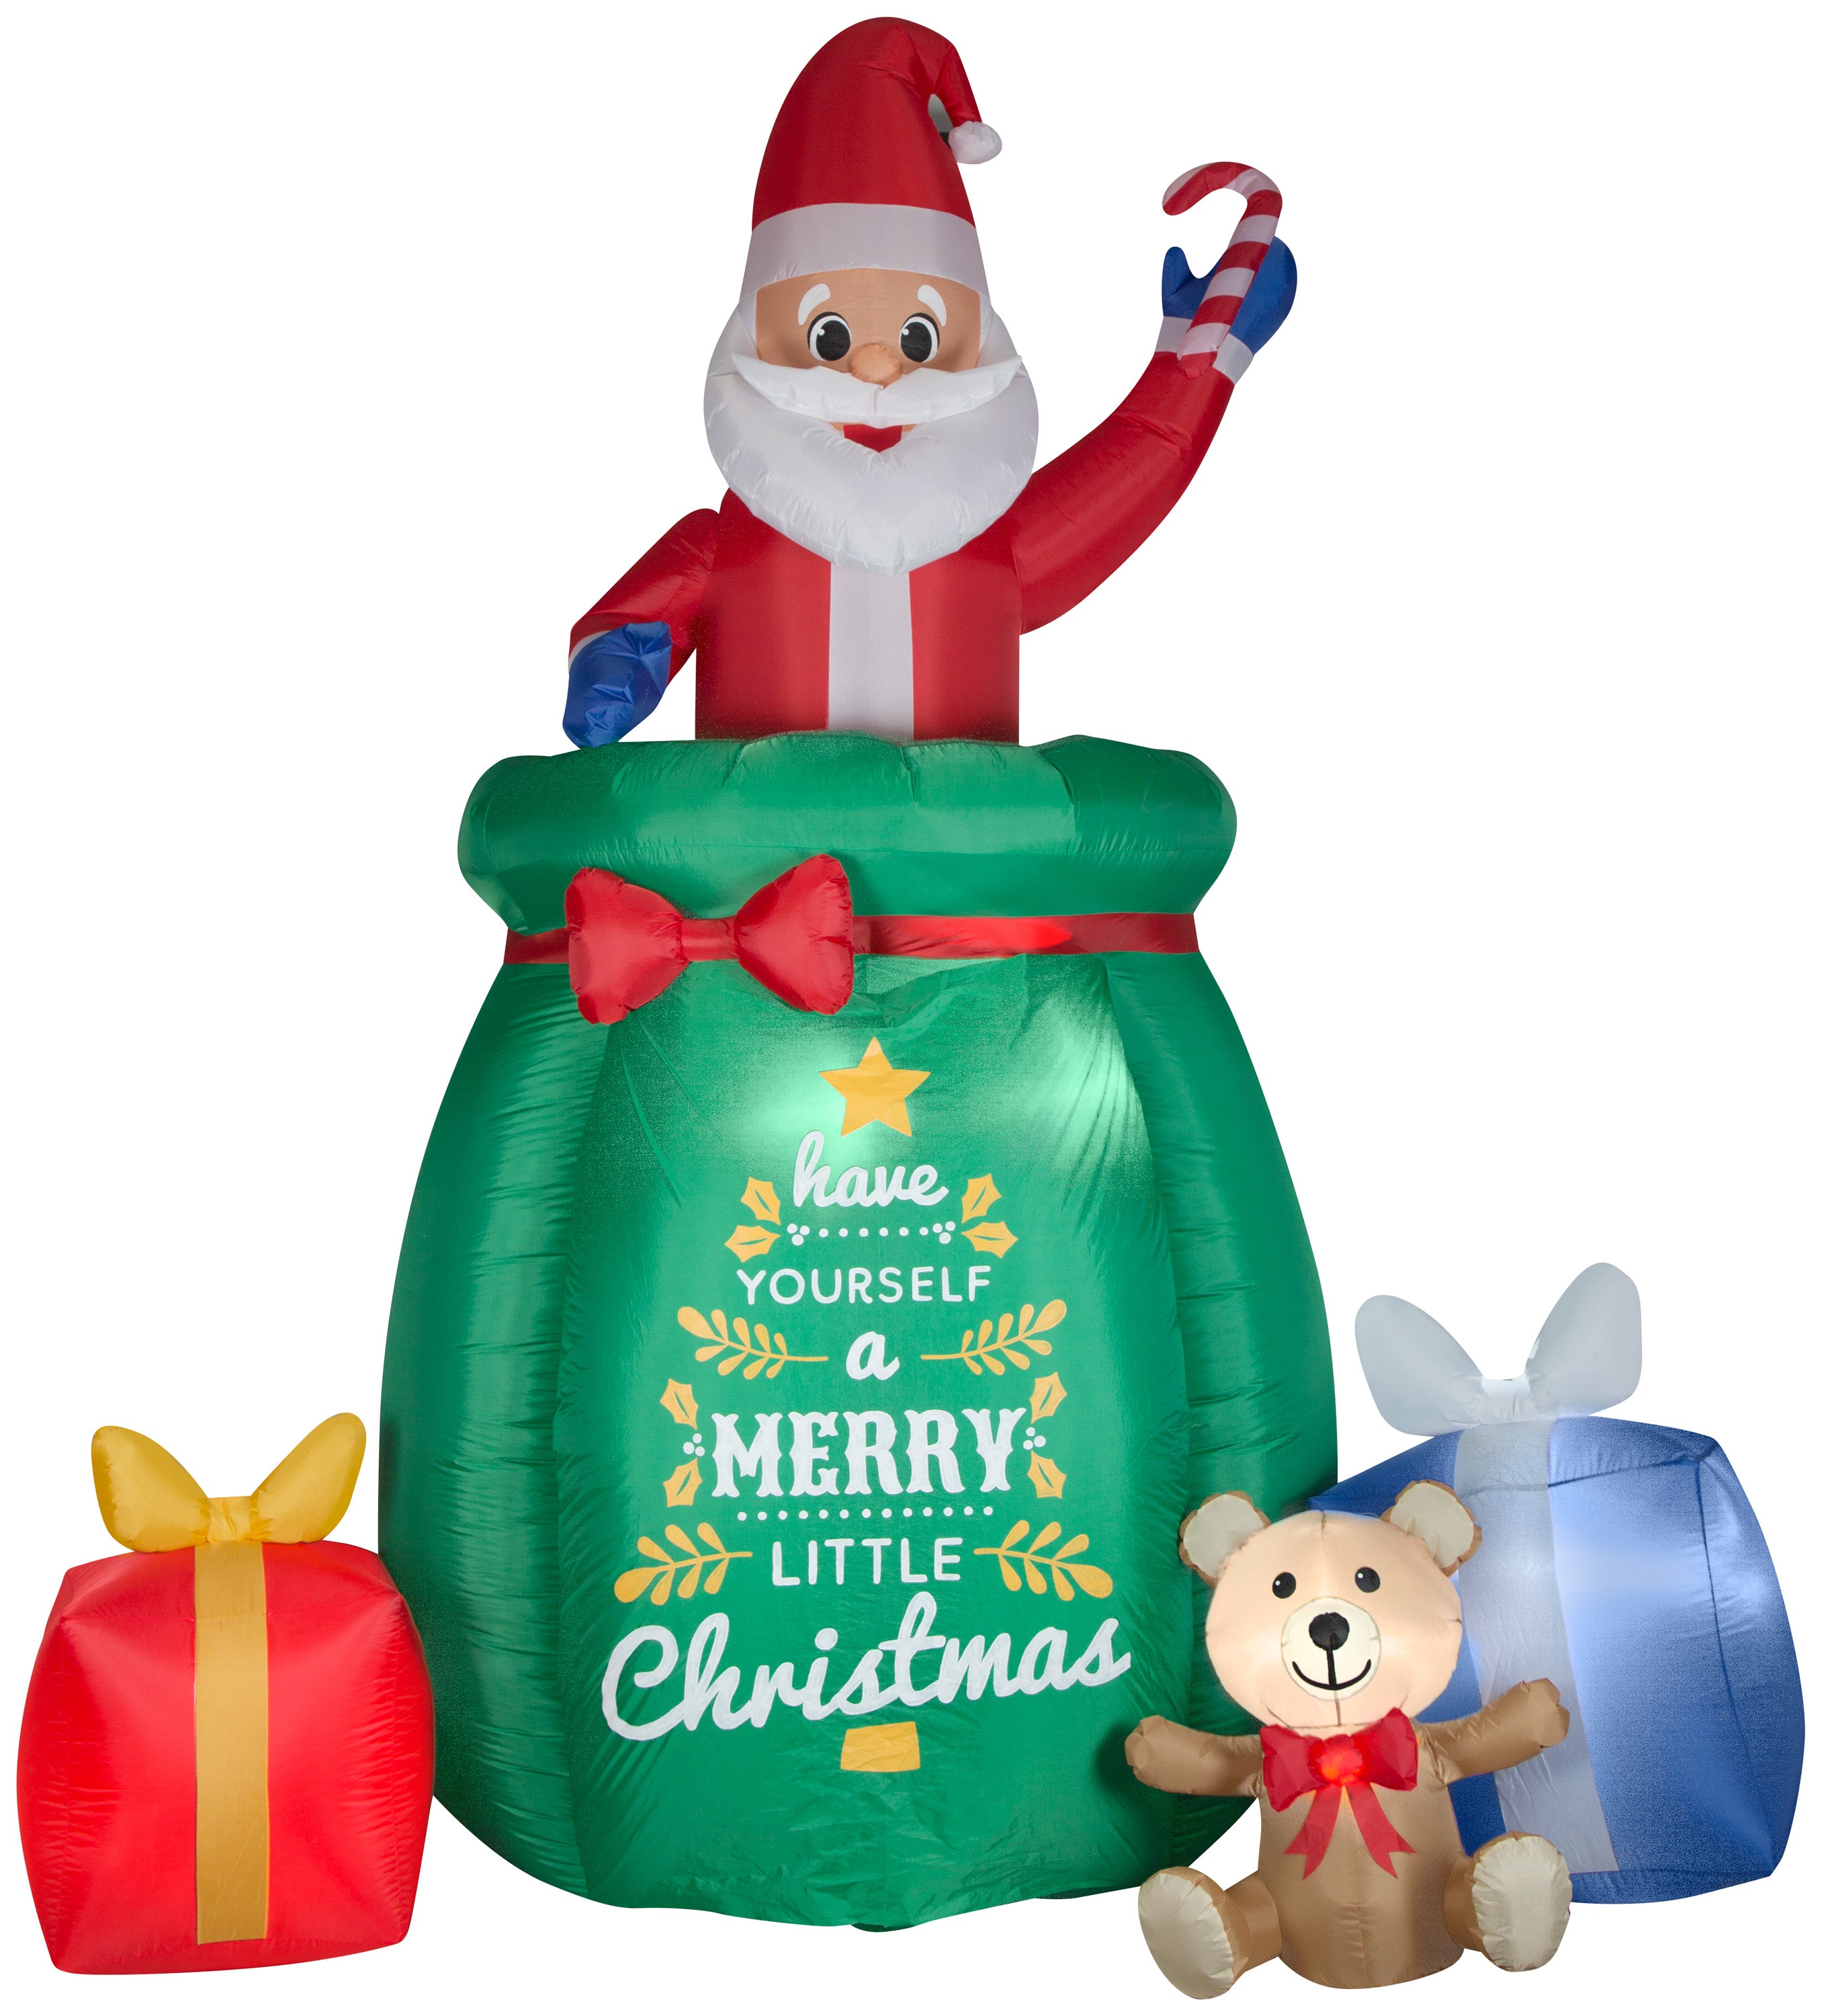 Gemmy Giant Animated Christmas Airblown Inflatable Inflatable Santa in a Gift Bag, 10 ft Tall, green